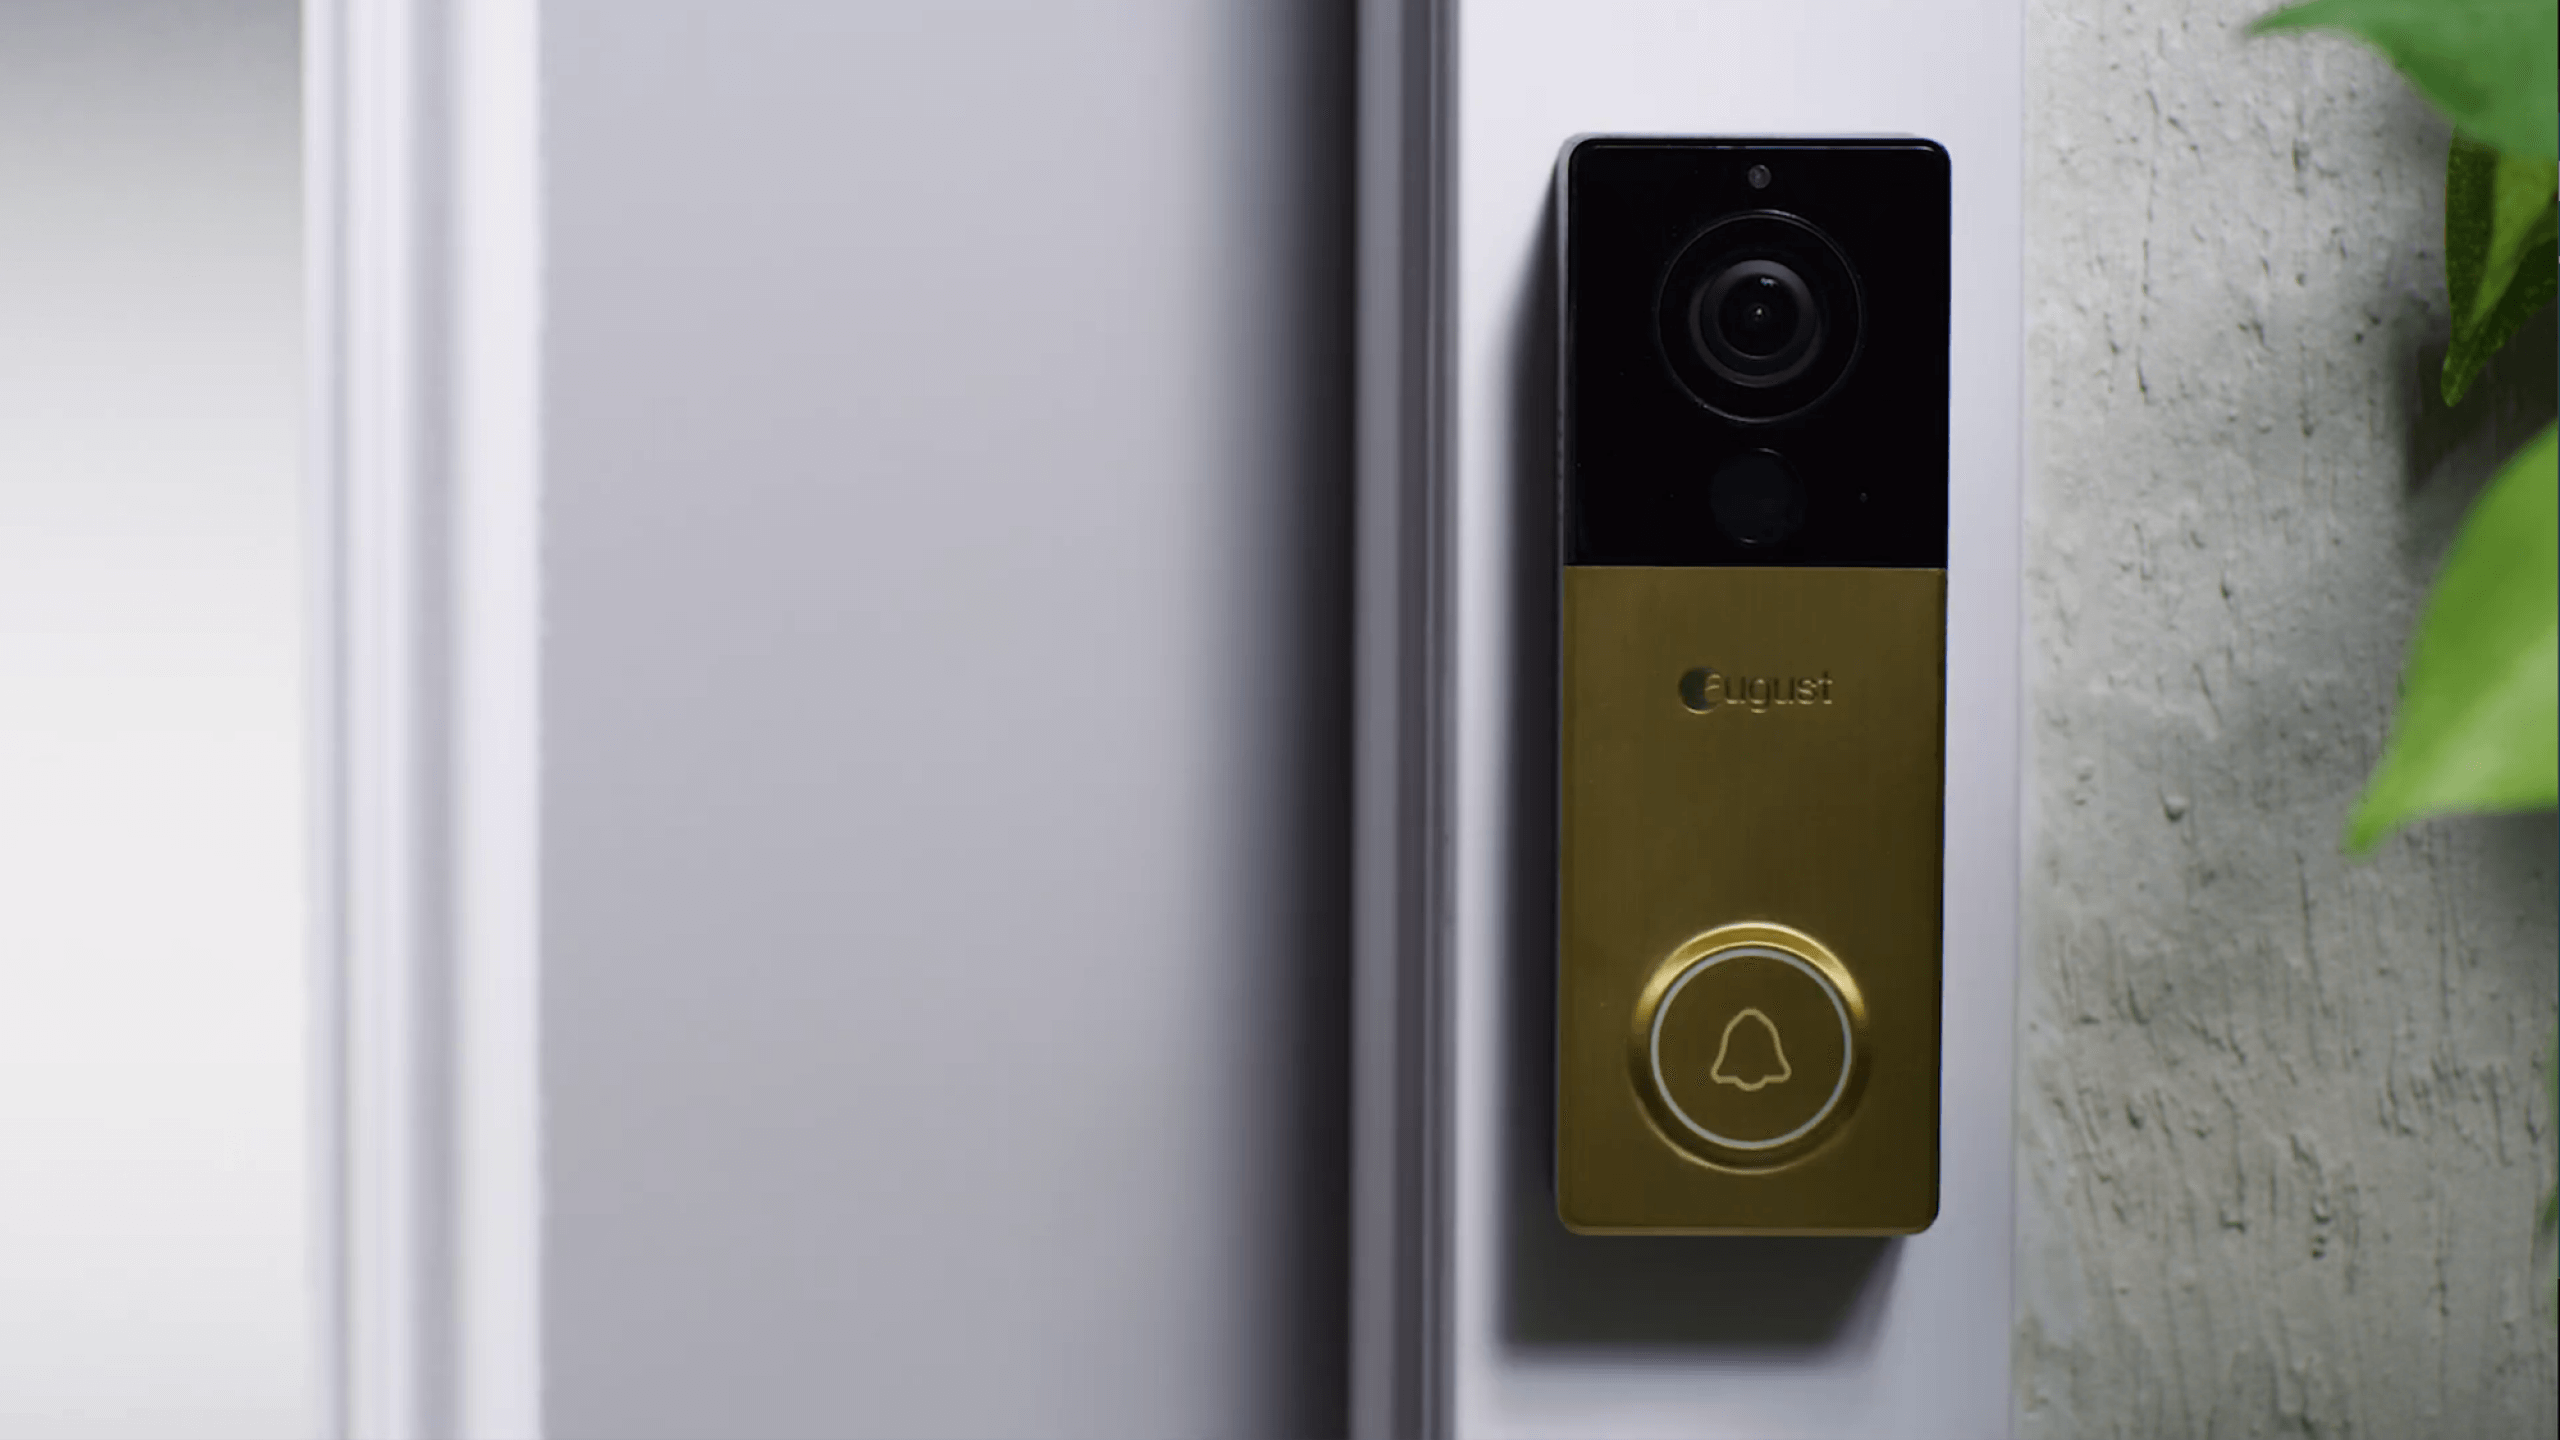 August Home pulls View doorbell only days after release